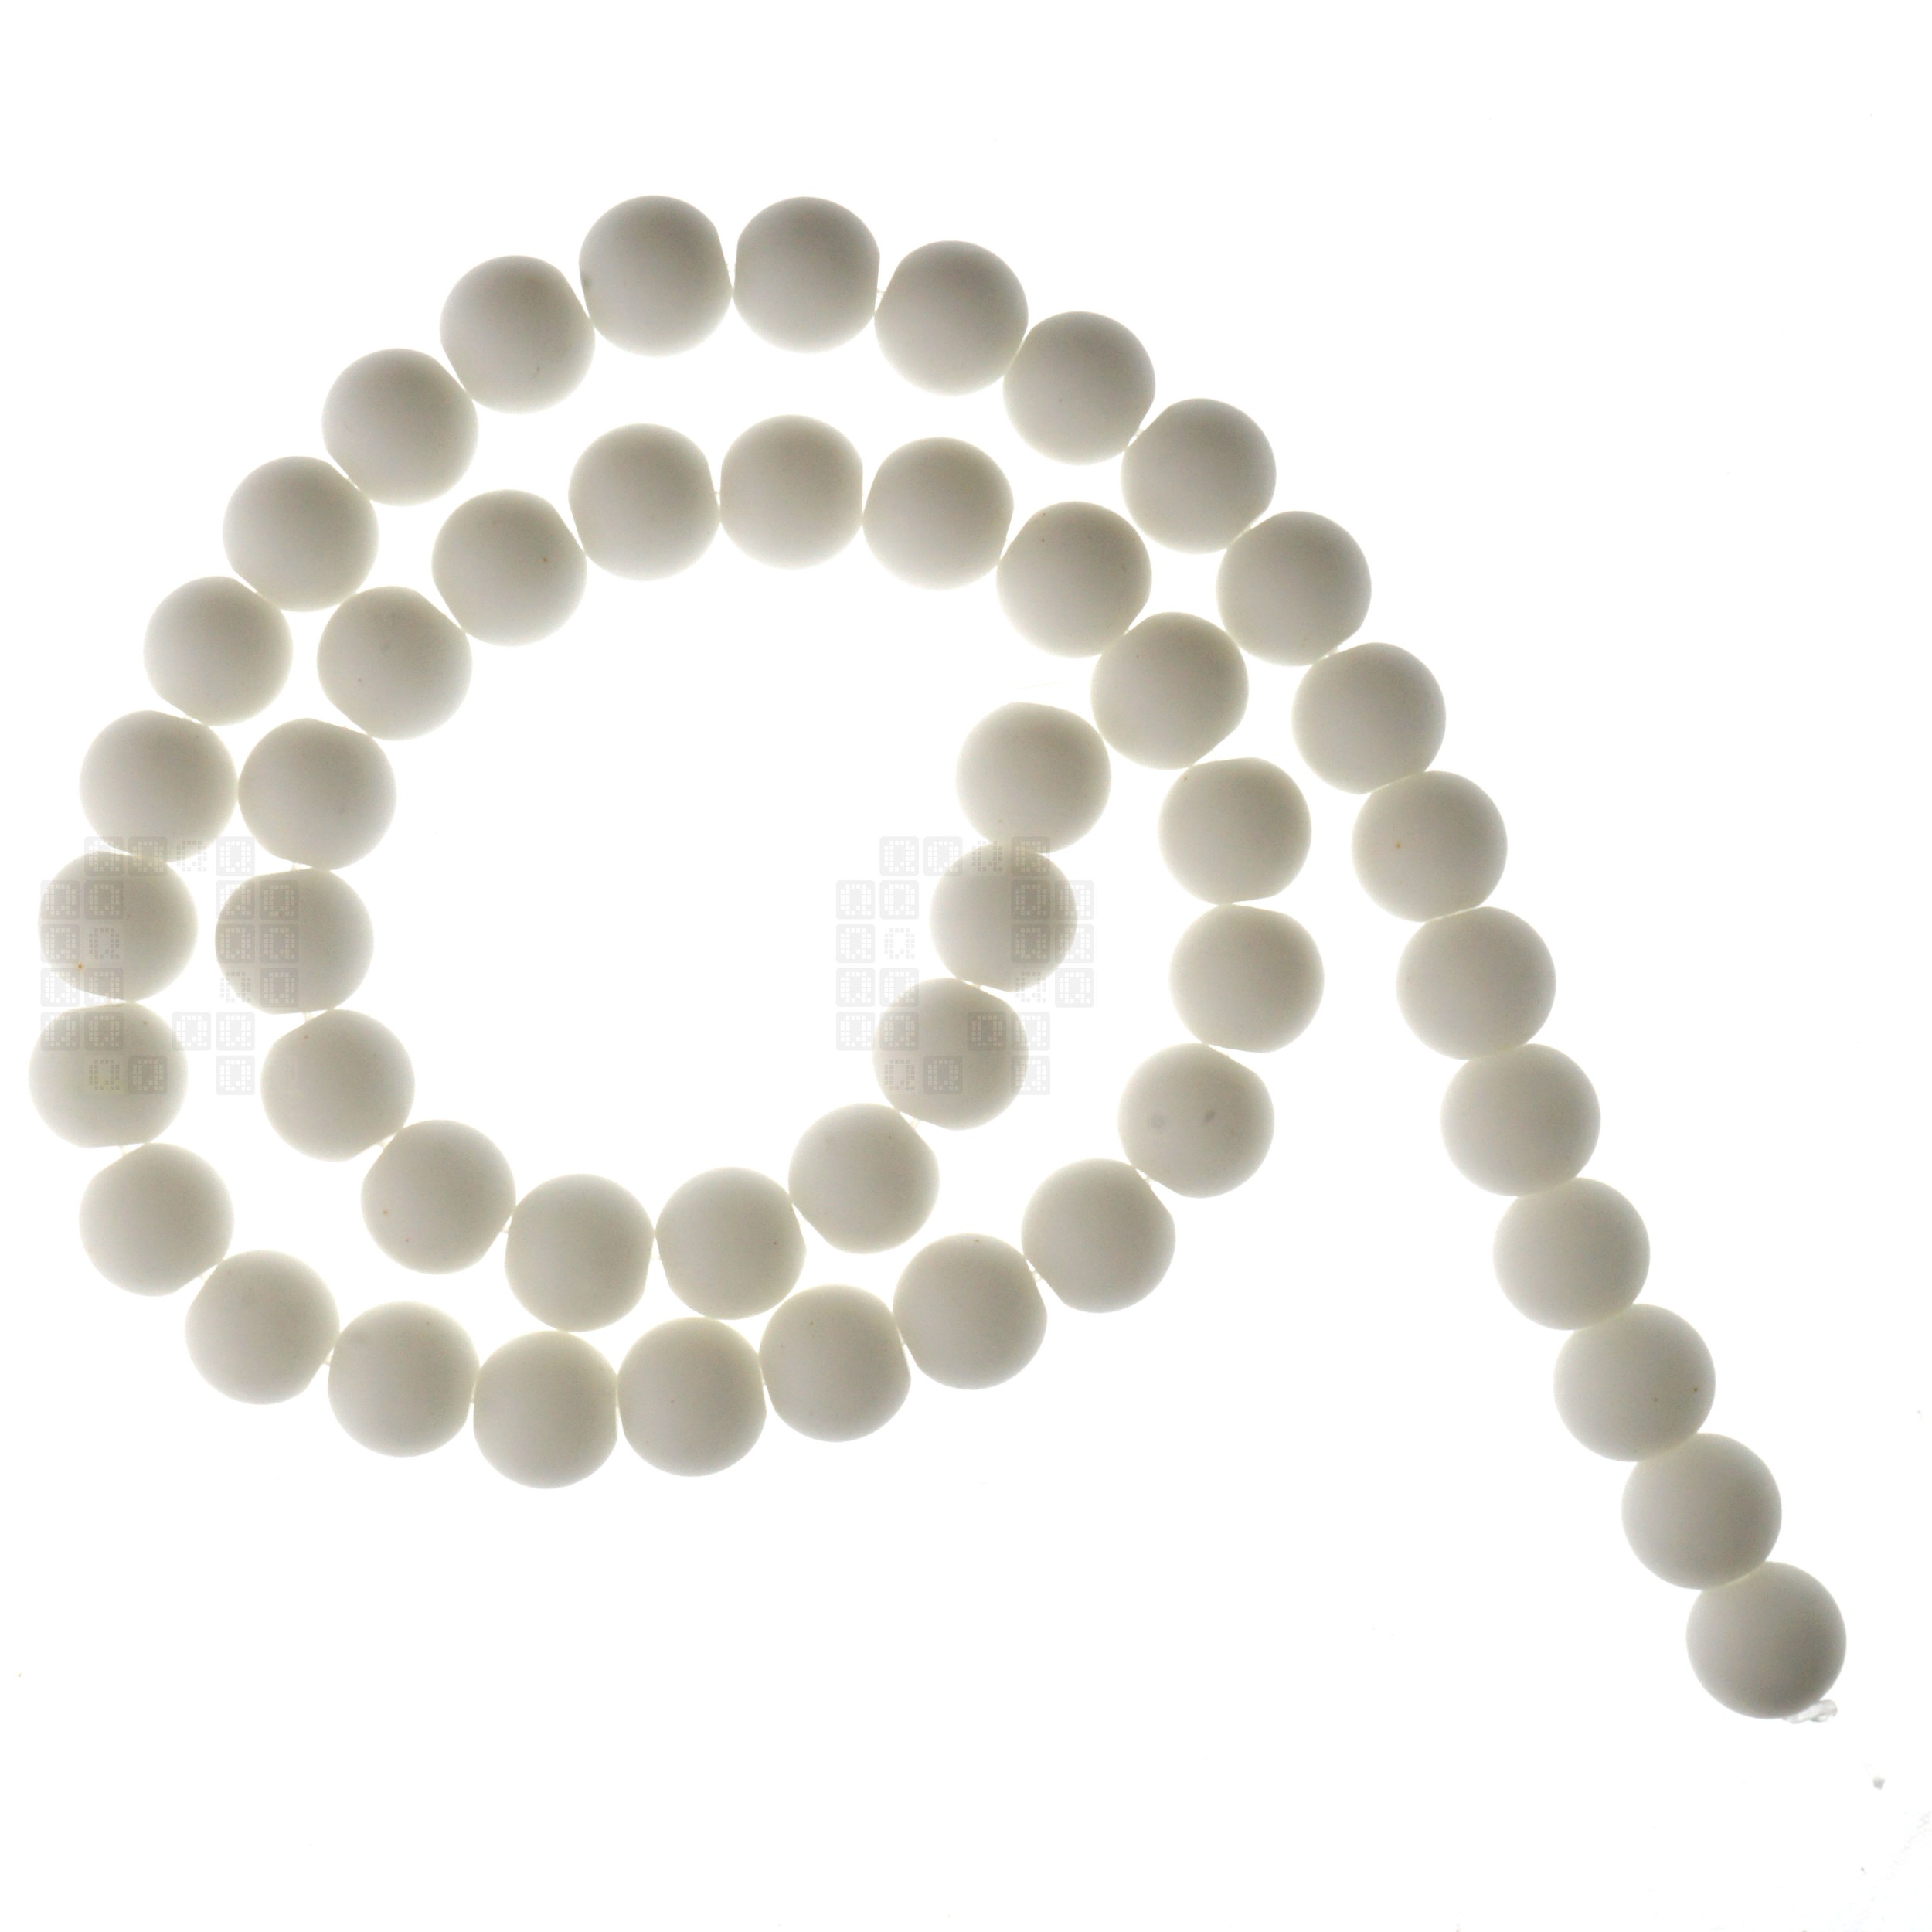 Matte White Agate 8mm Round Beads, 45 Pieces